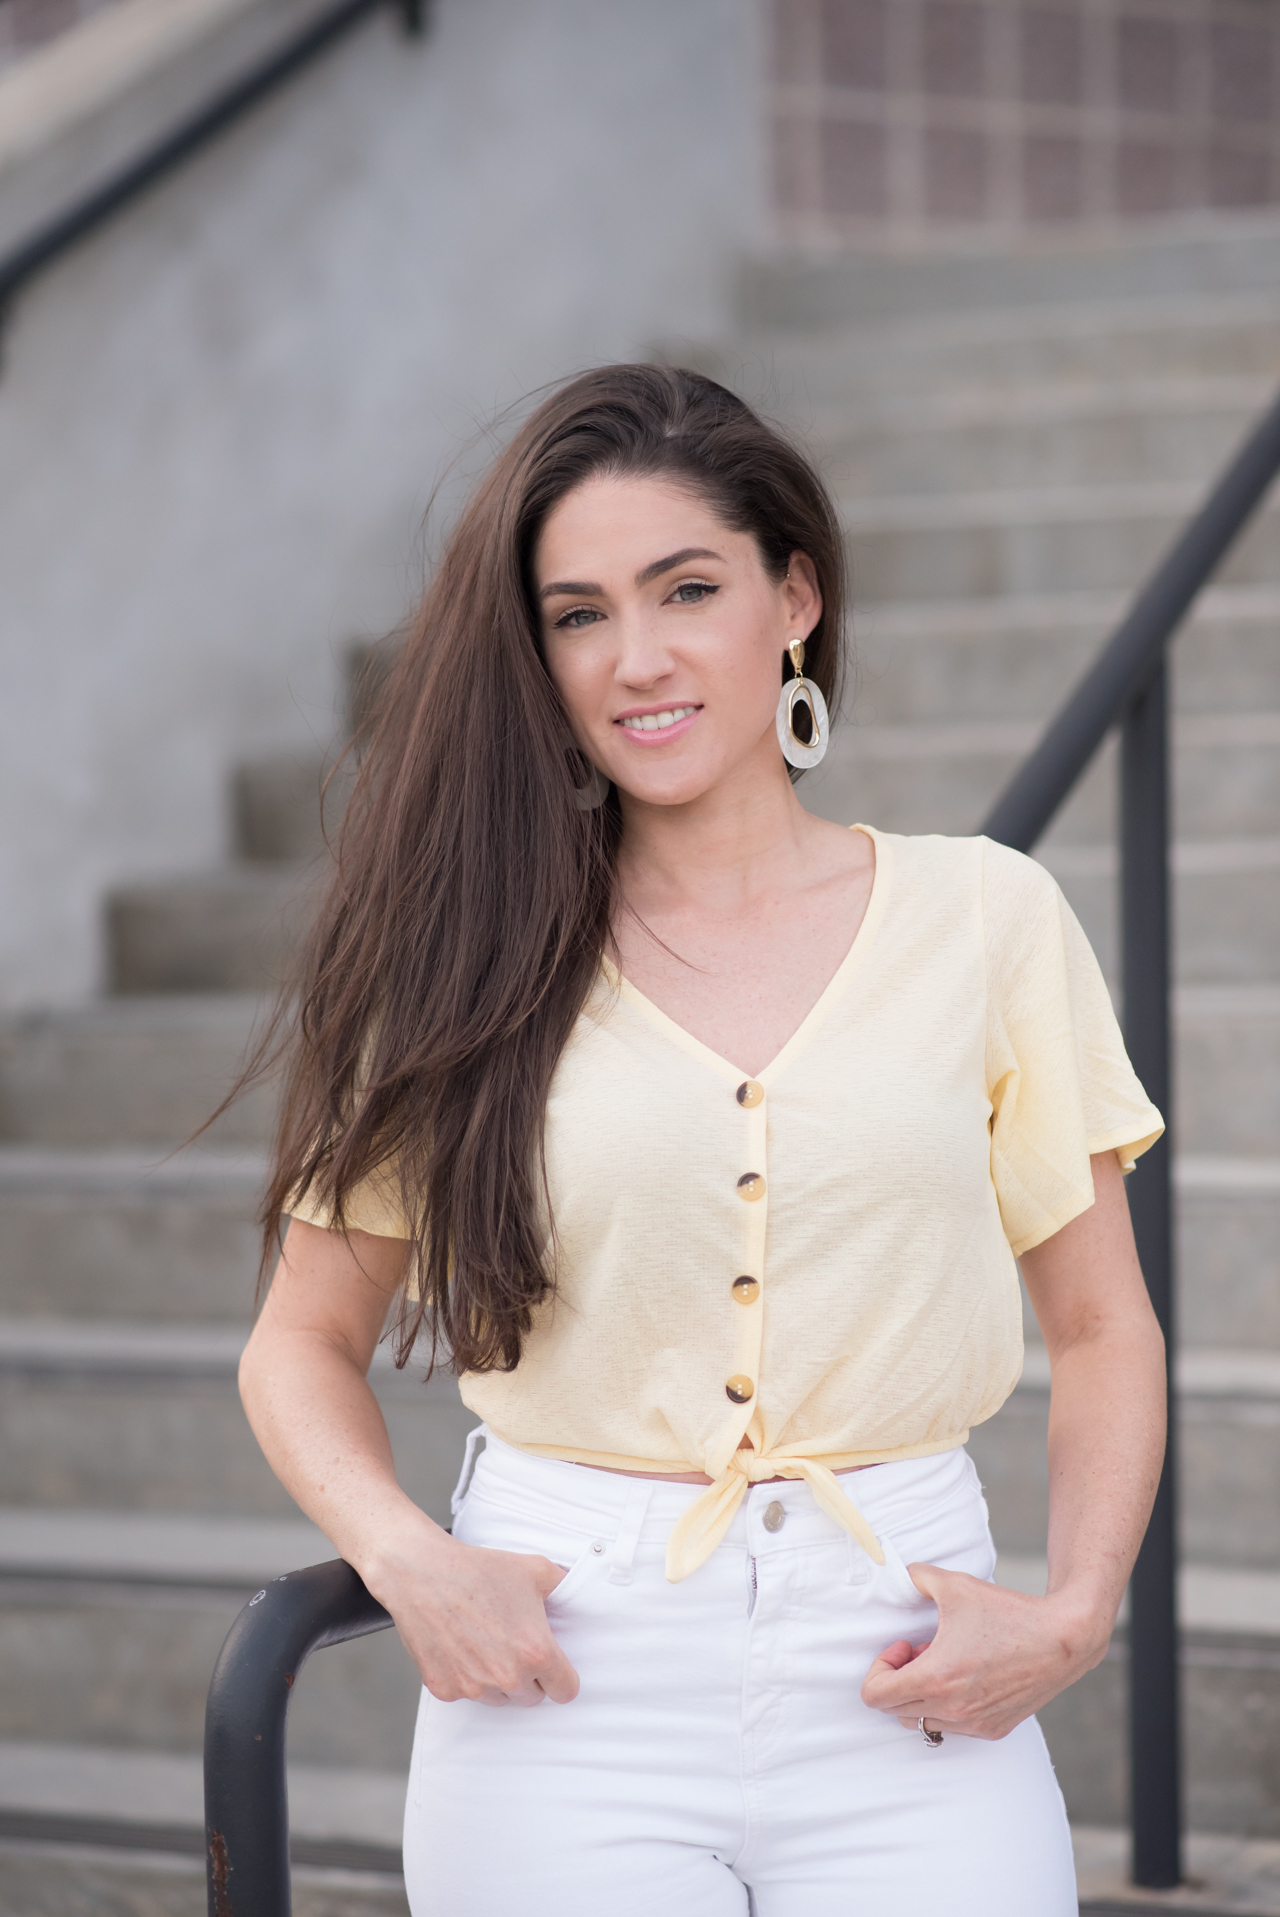 Yellow Crop Top and White High-Waisted Topshop Jeans - Atlanta Style Blogger Erica Valentin